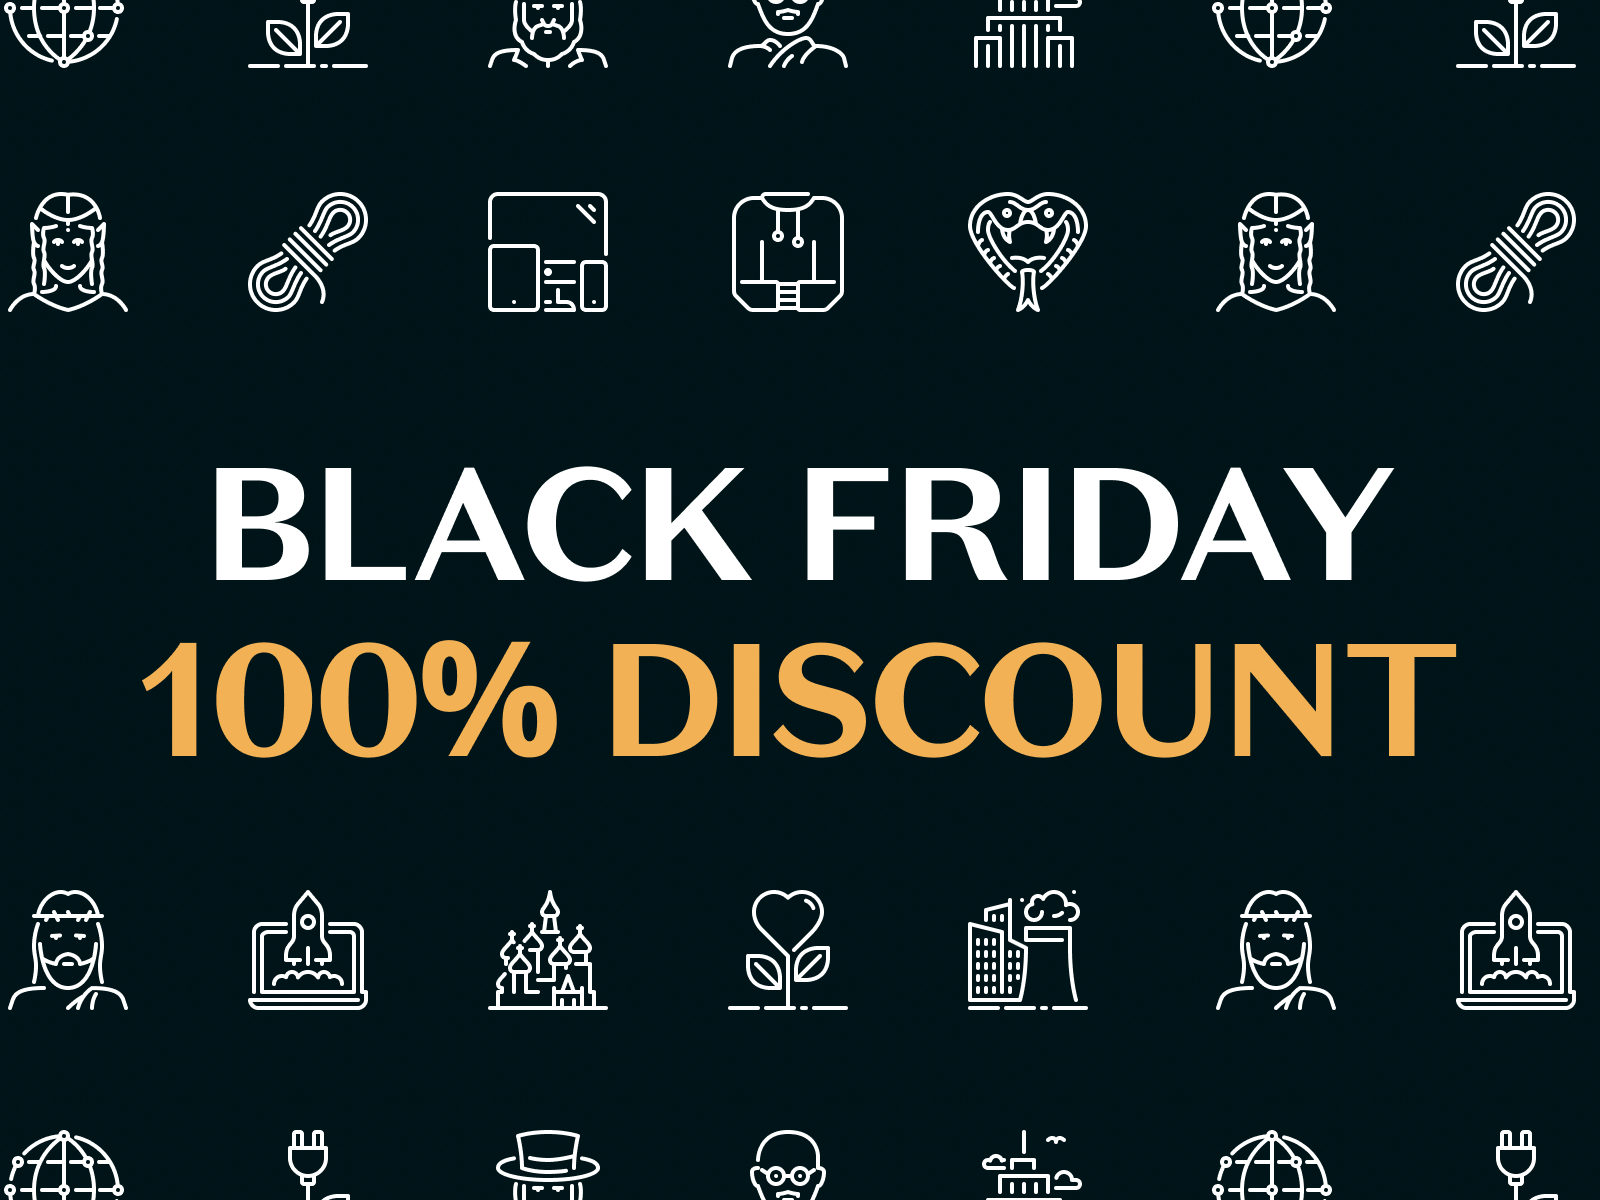 Black Friday 100% Discount - Pixel Bazaar 2d art black friday discount flat flat icons free freebie icon icon design icon set iconography icons interface icons line icons lines sketch vector visual design web icons